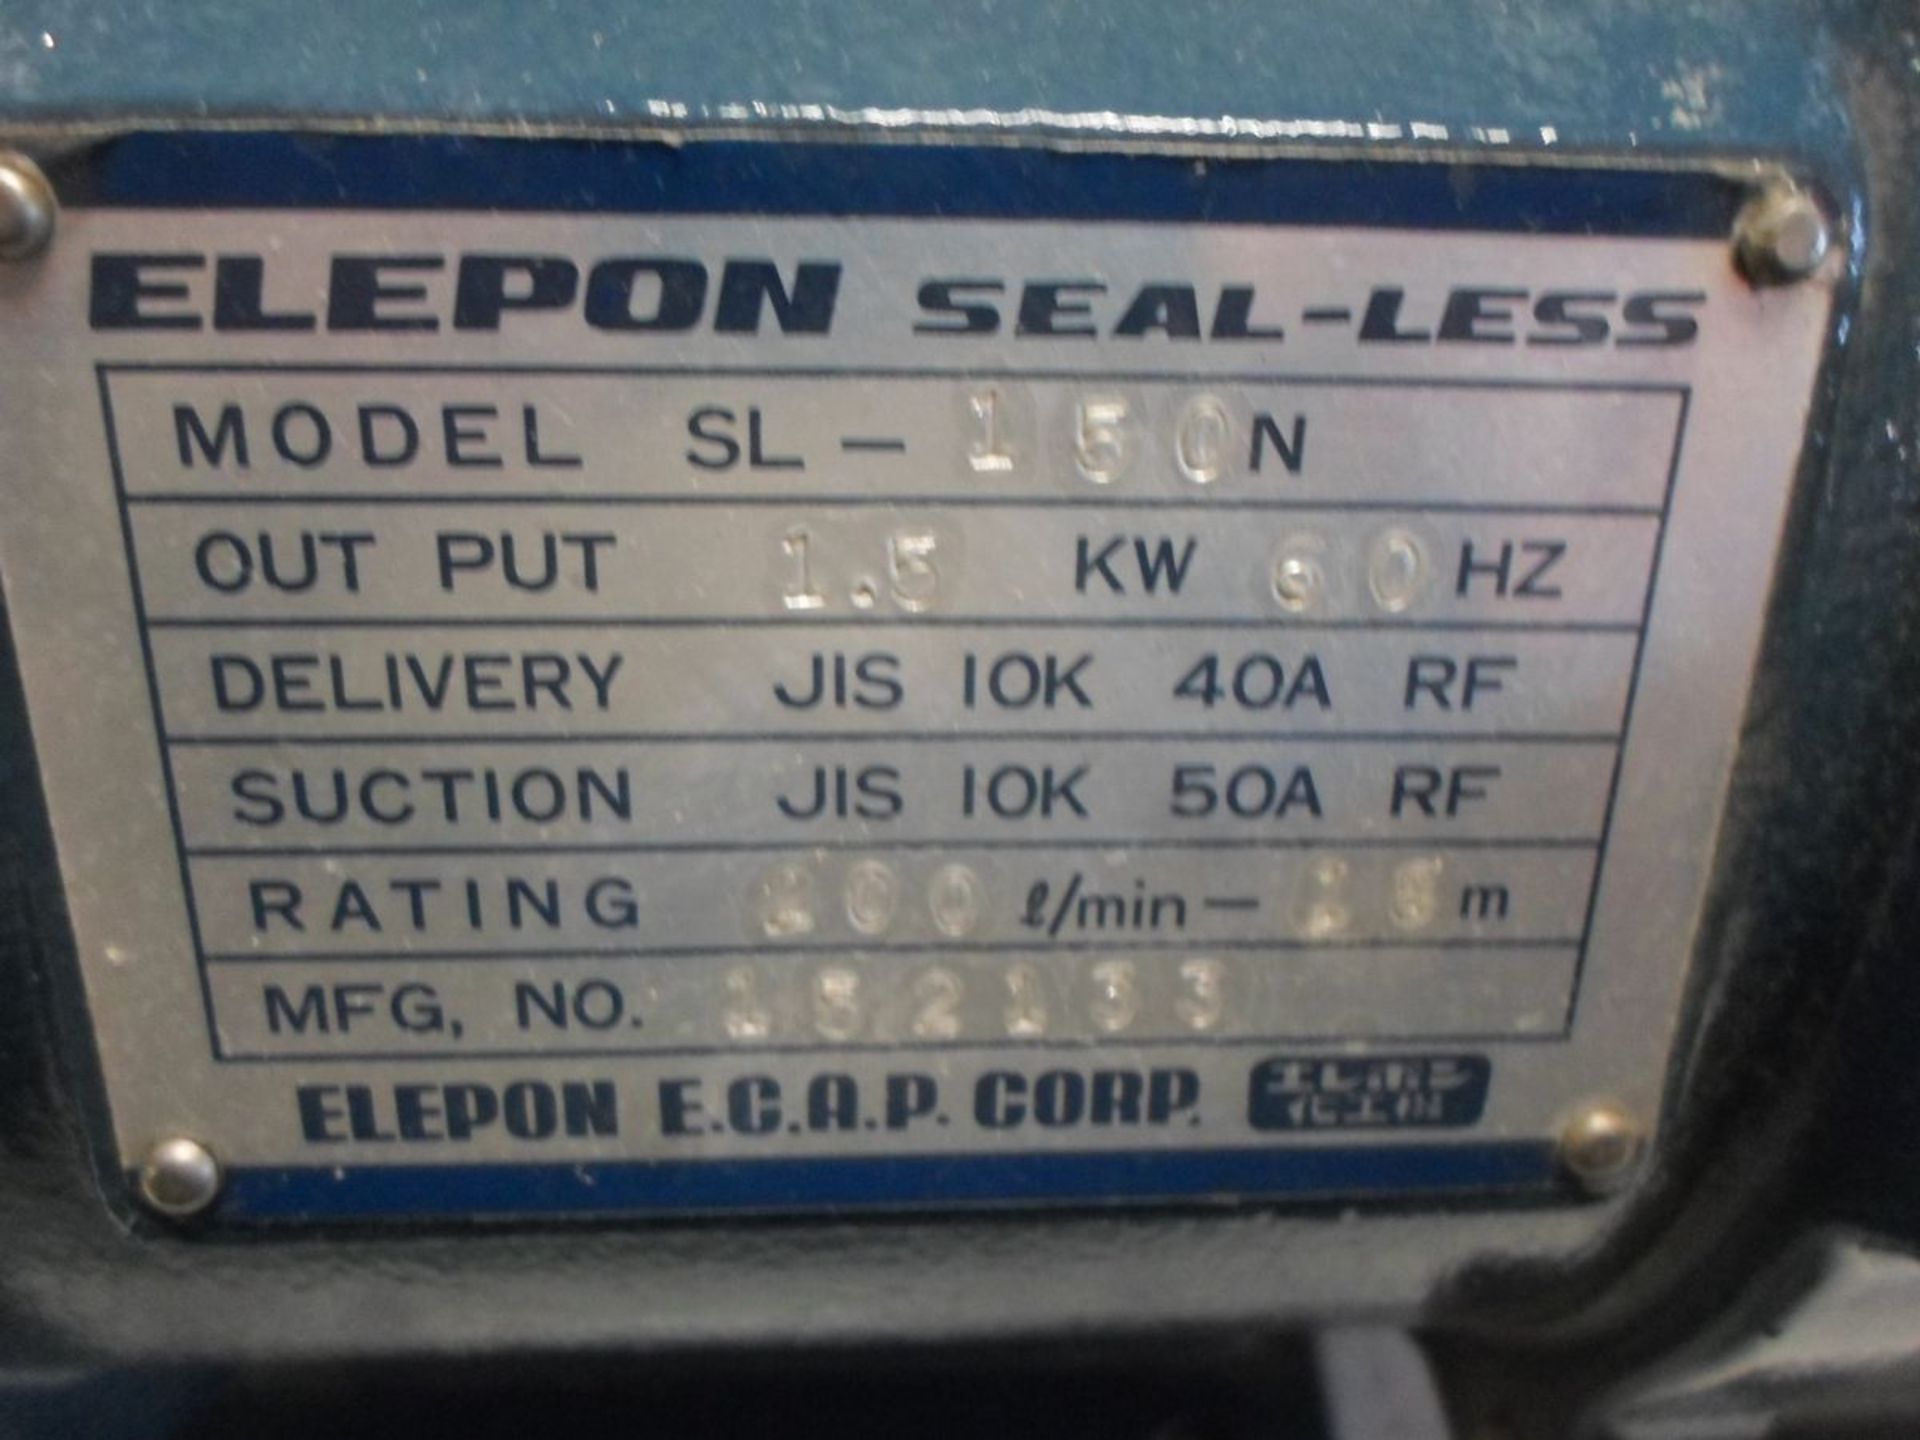 LOT OF TWO ELEPON SEAL-LESS SL-150N 2HP PUMPS - Image 2 of 3